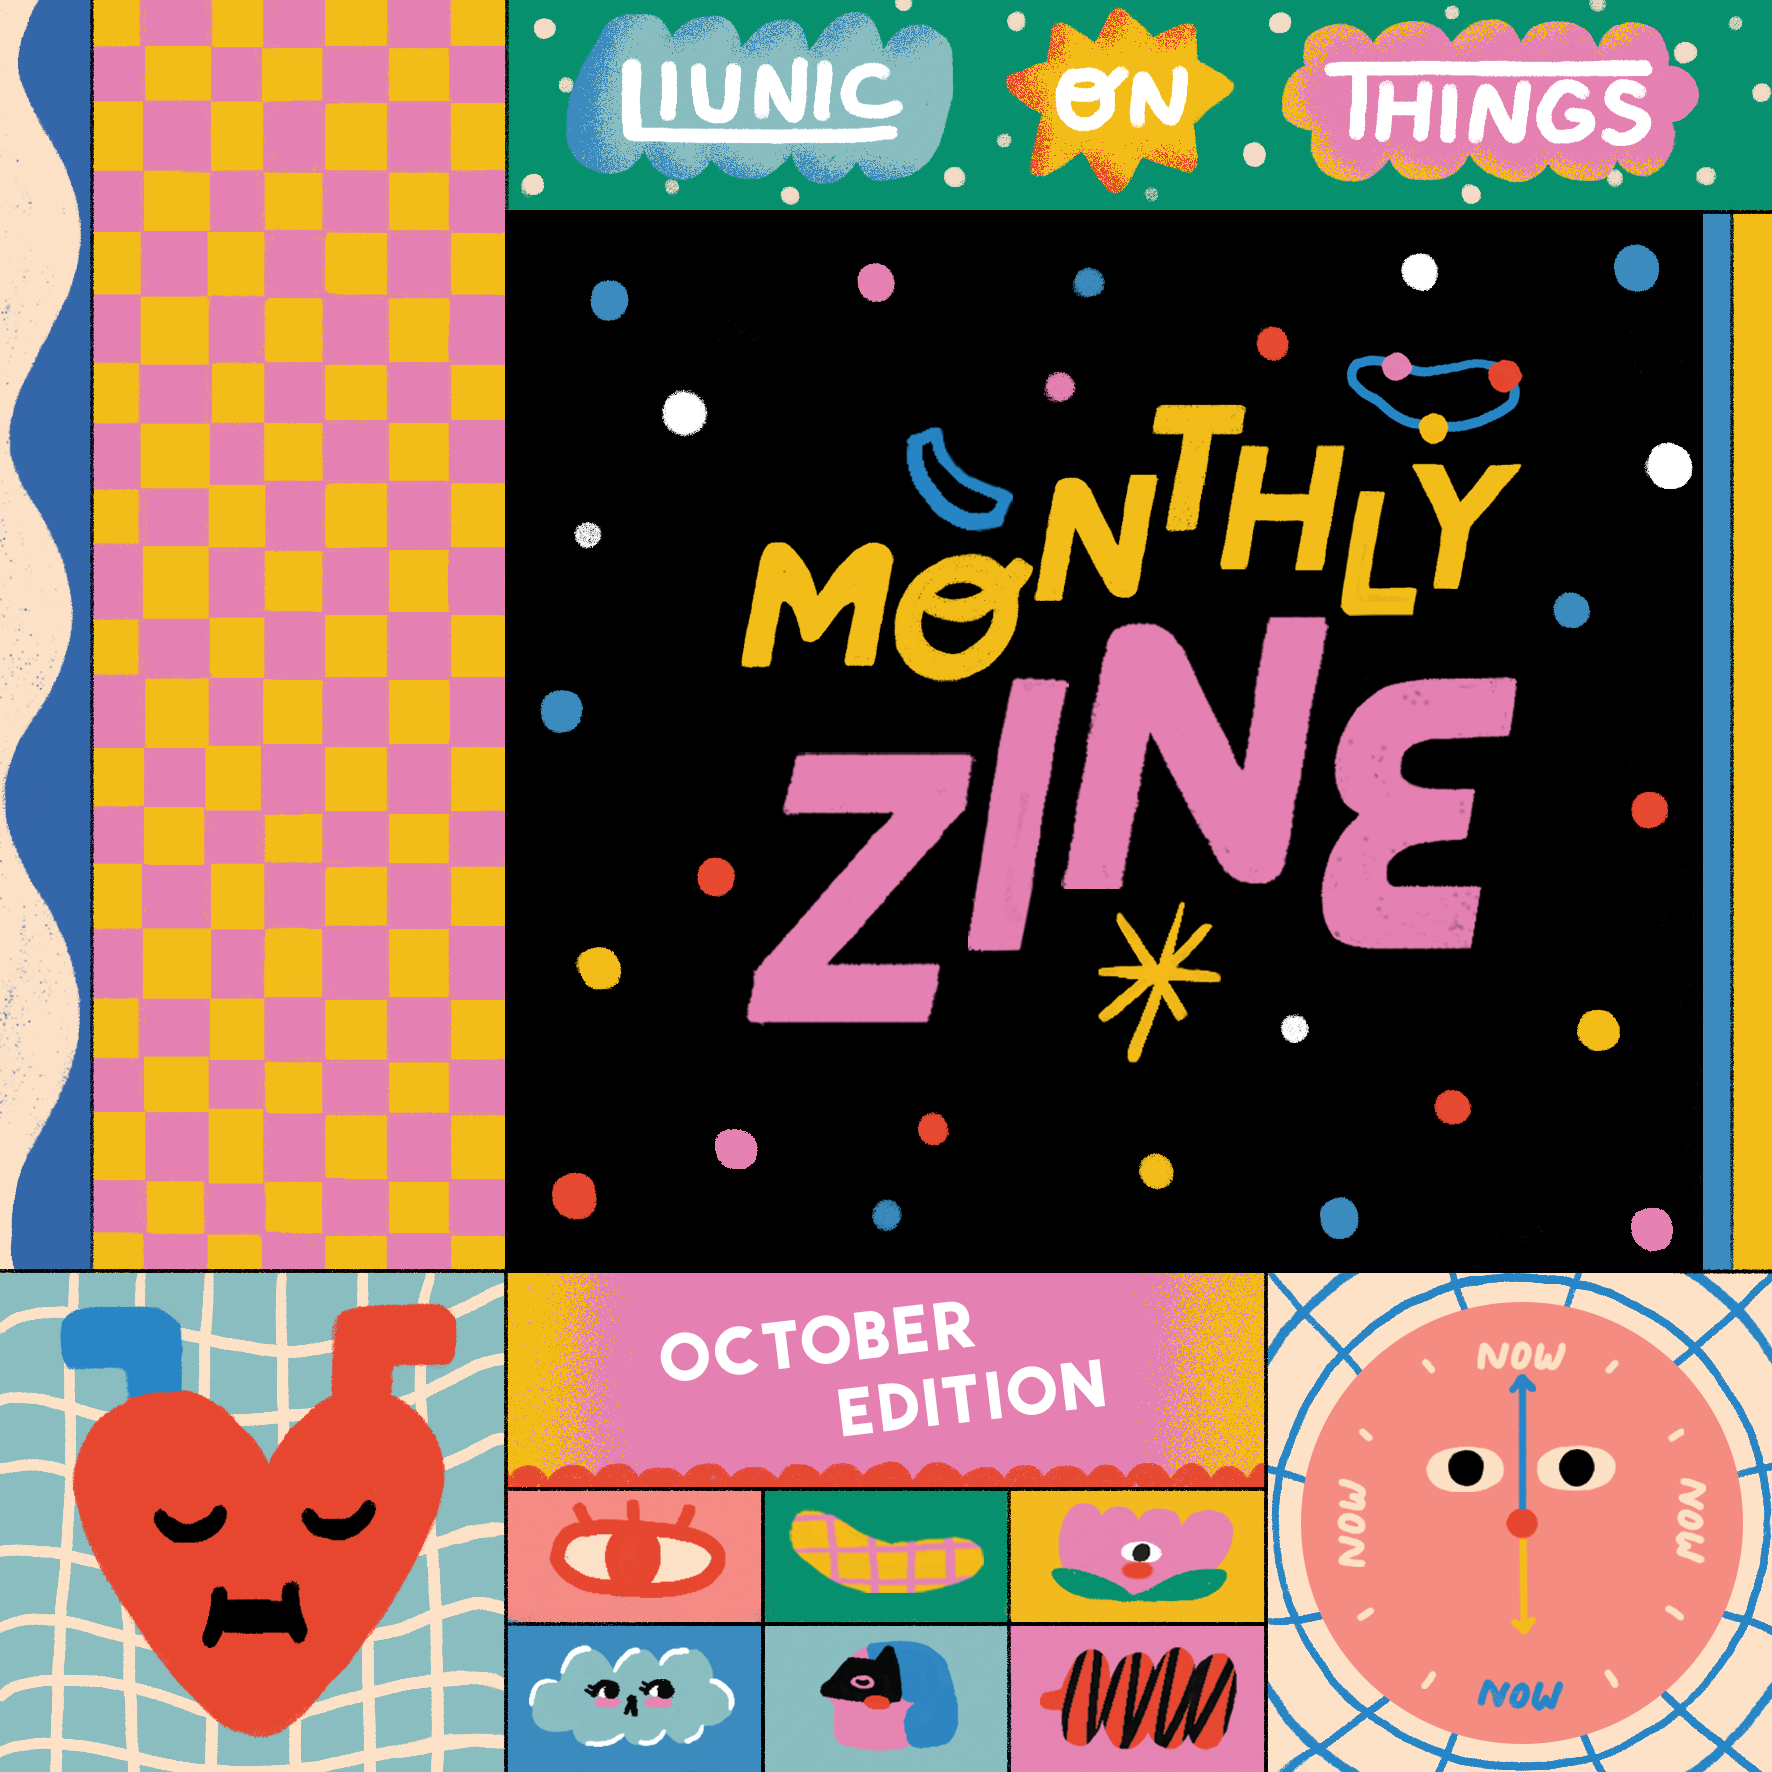 Liunic on Things Monthly Zine: October Edition!